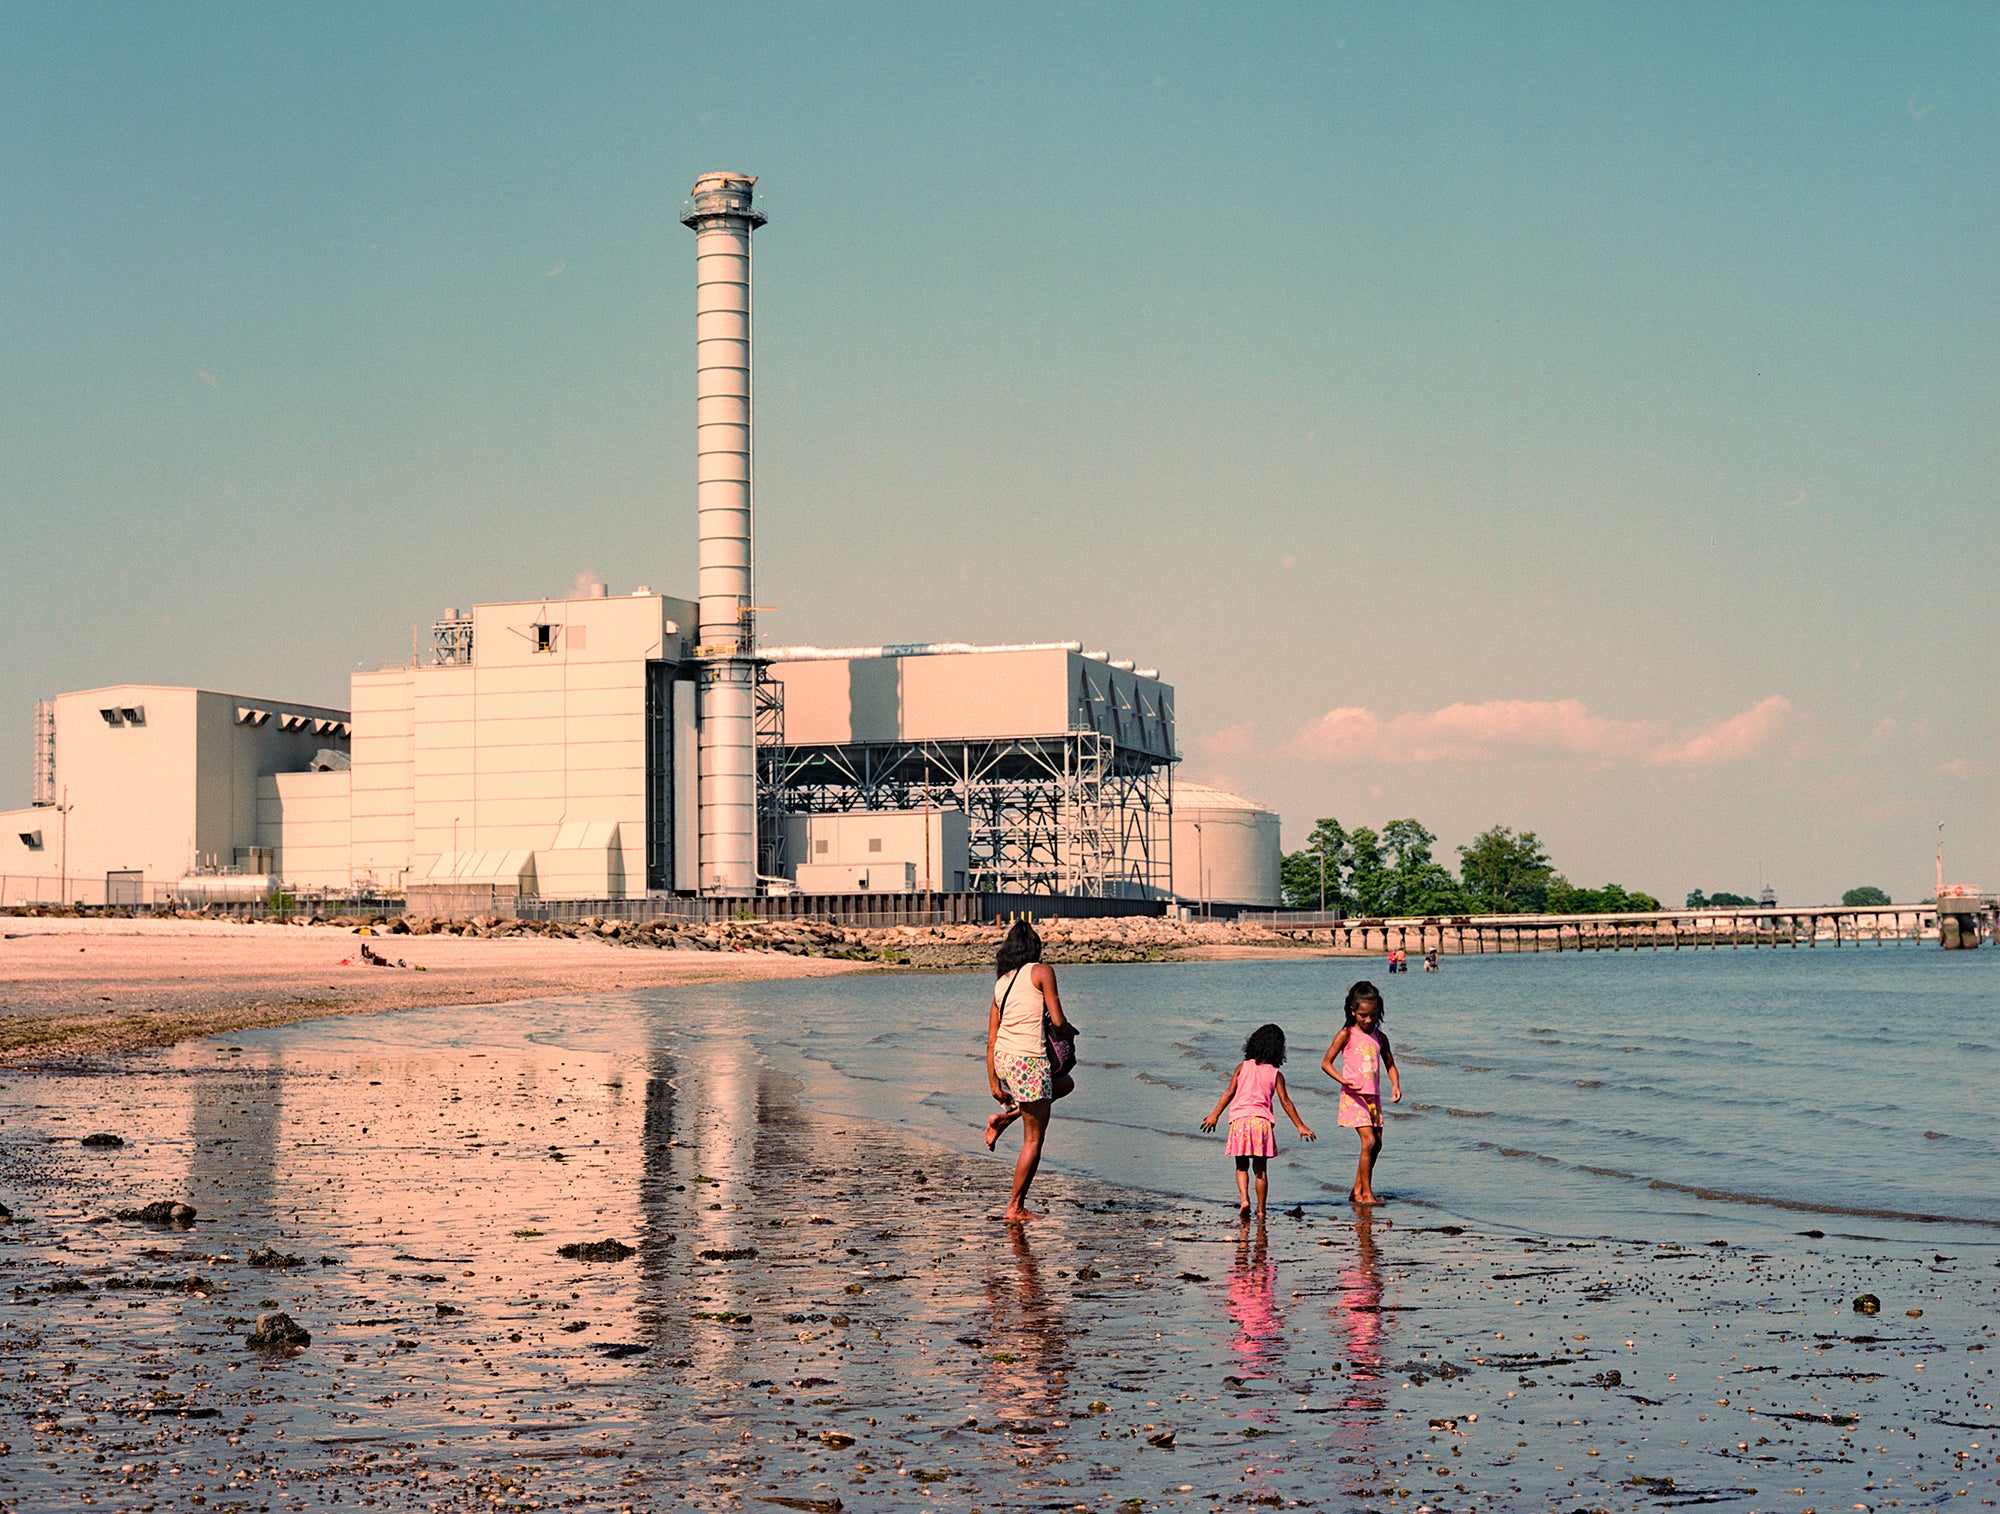 The new PSEG gas-fired power plant plant sits next to Bridgeport Harbor, Conn.
(Allison Minto for Earthjustice)